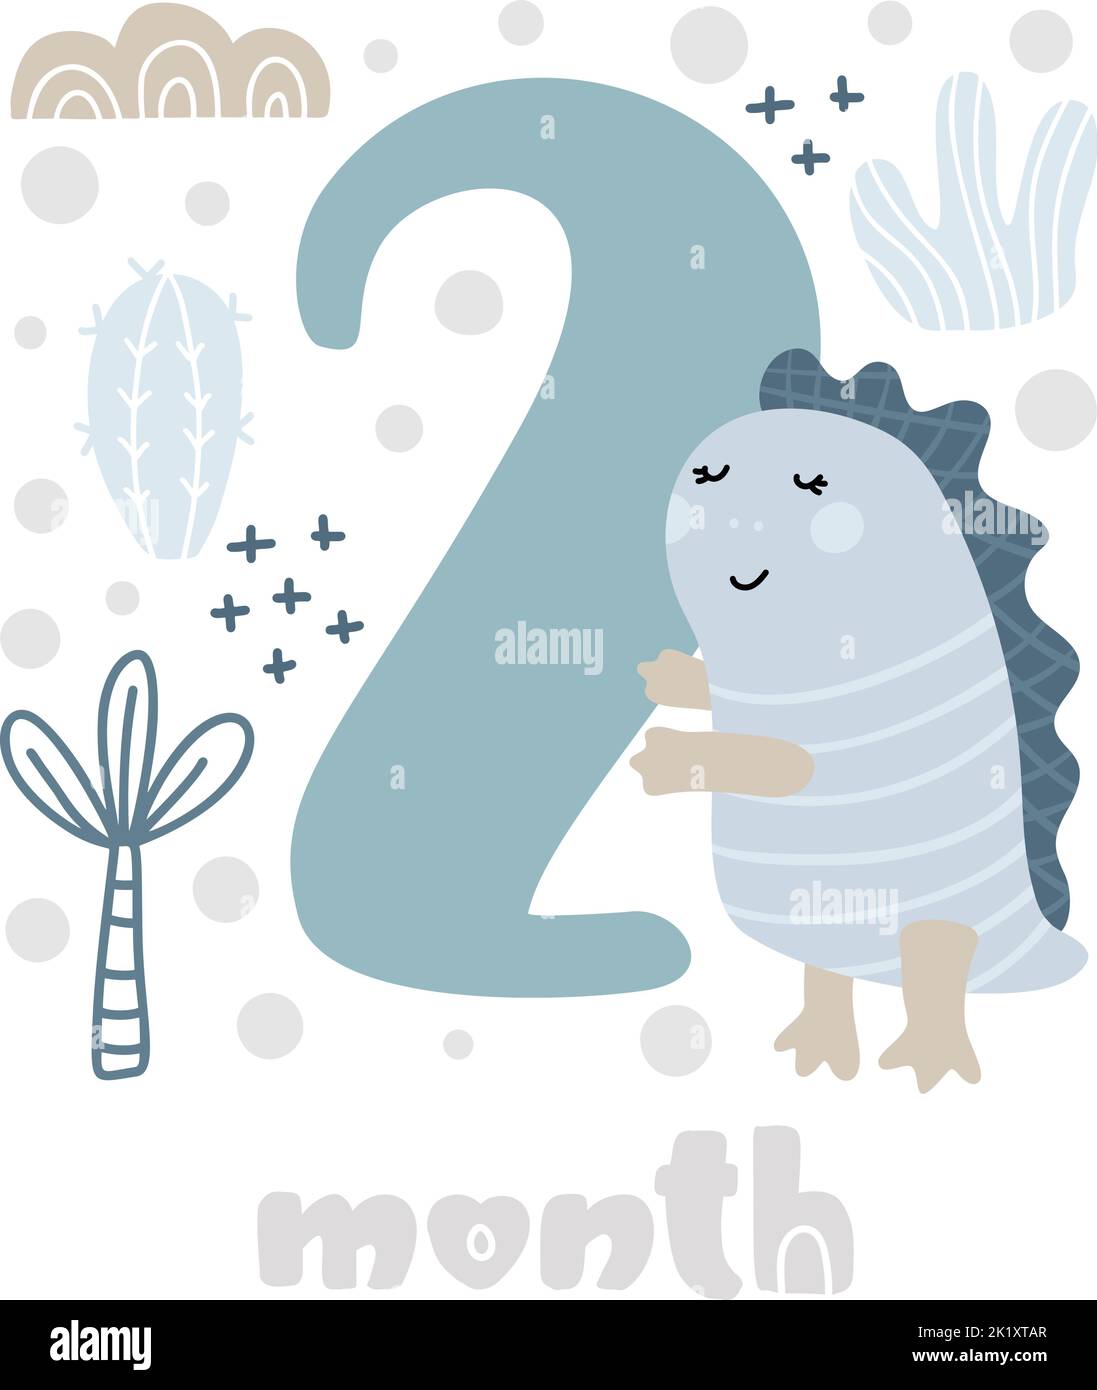 2 two months Baby boy anniversary card metrics. Baby shower print with cute animal dino, flowers and palm capturing all special moments. Baby Stock Vector